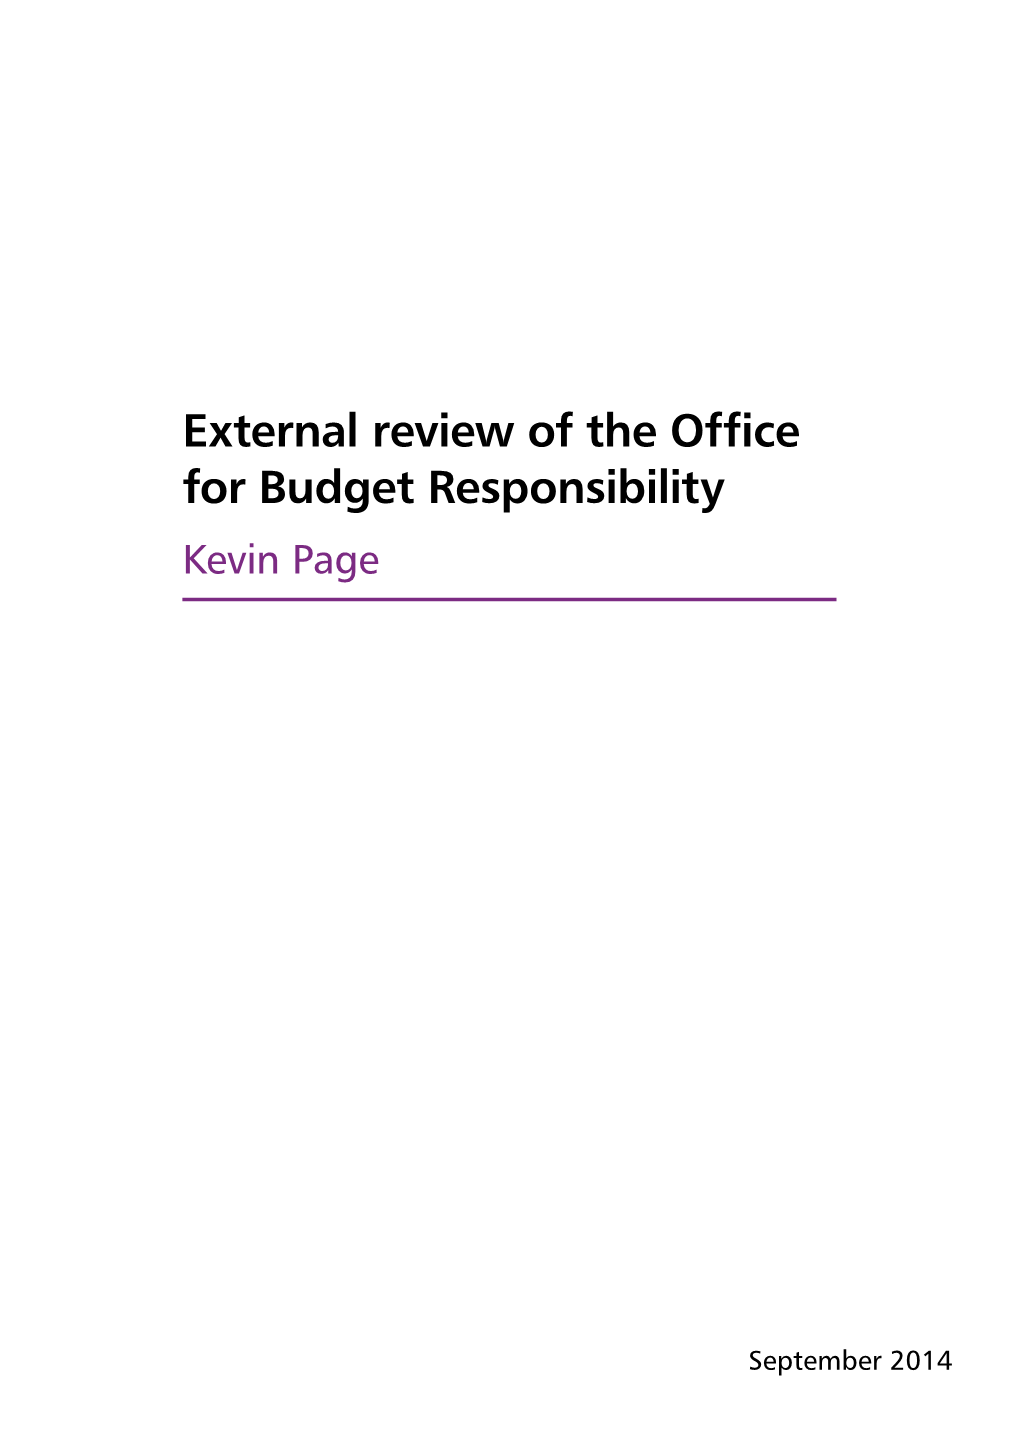 First External Review of the OBR